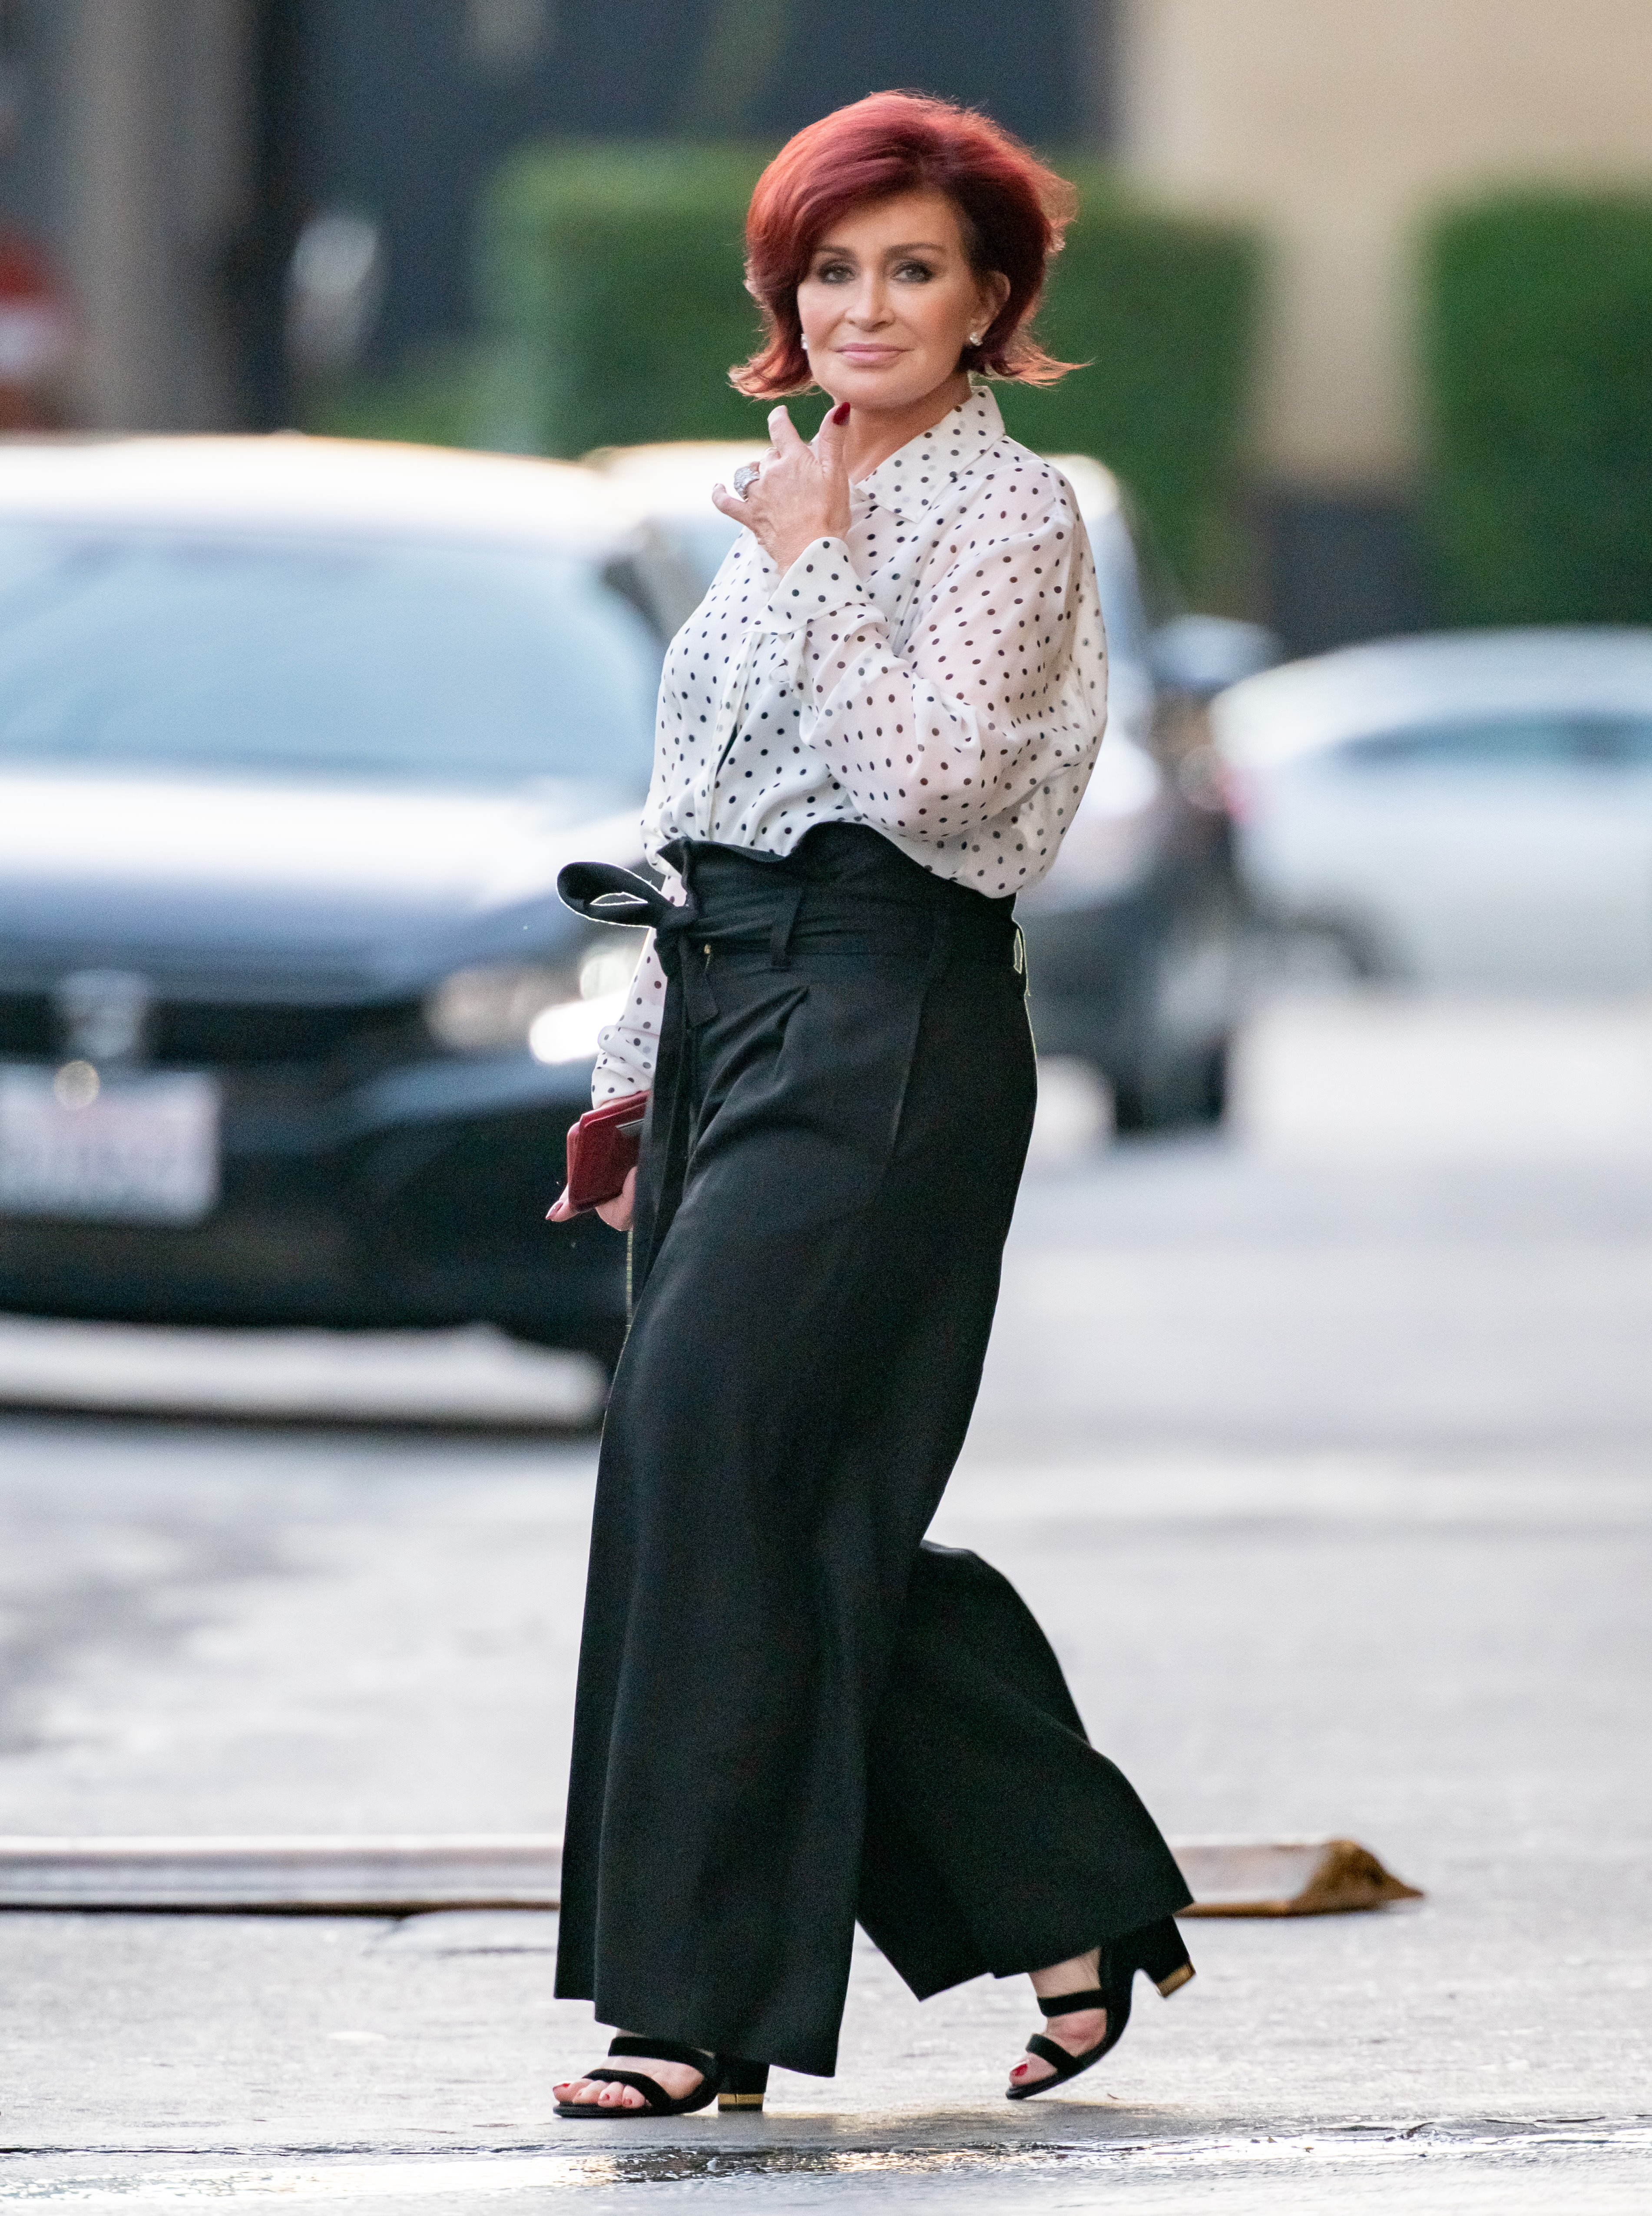 Sharon Osbourne stepping out for her appearance at "Jimmy Kimmel Live" in Los Angeles, California on September 11, 2019 | Source: Getty Images